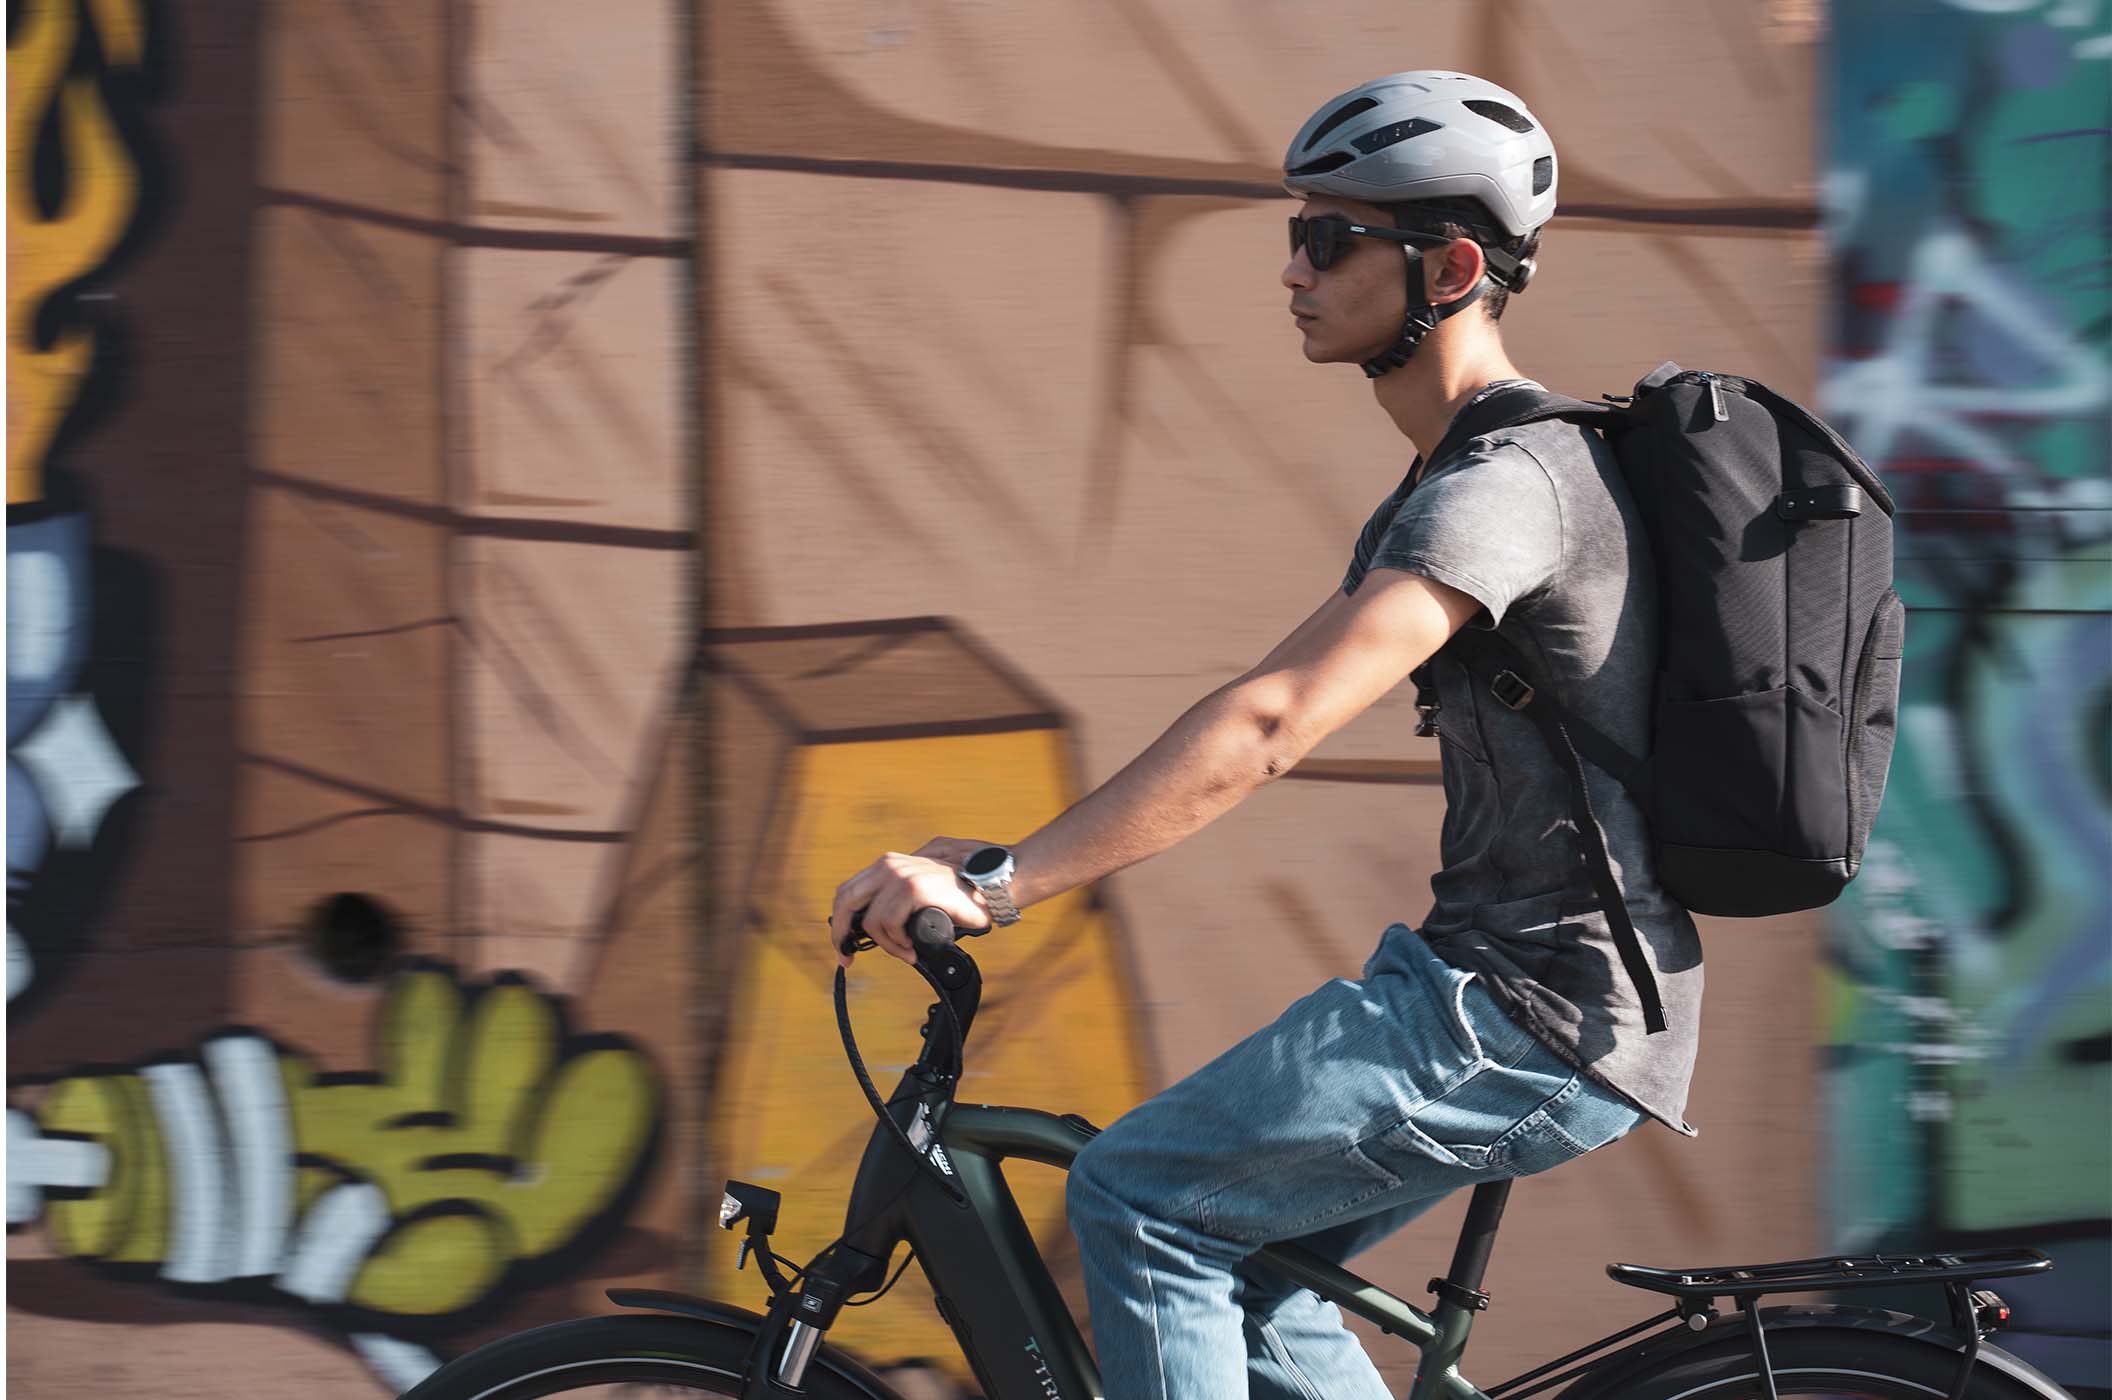 Make the City Your Territory: KASK Urban Lifestyle Helmets for Everyday Riders & Commuters